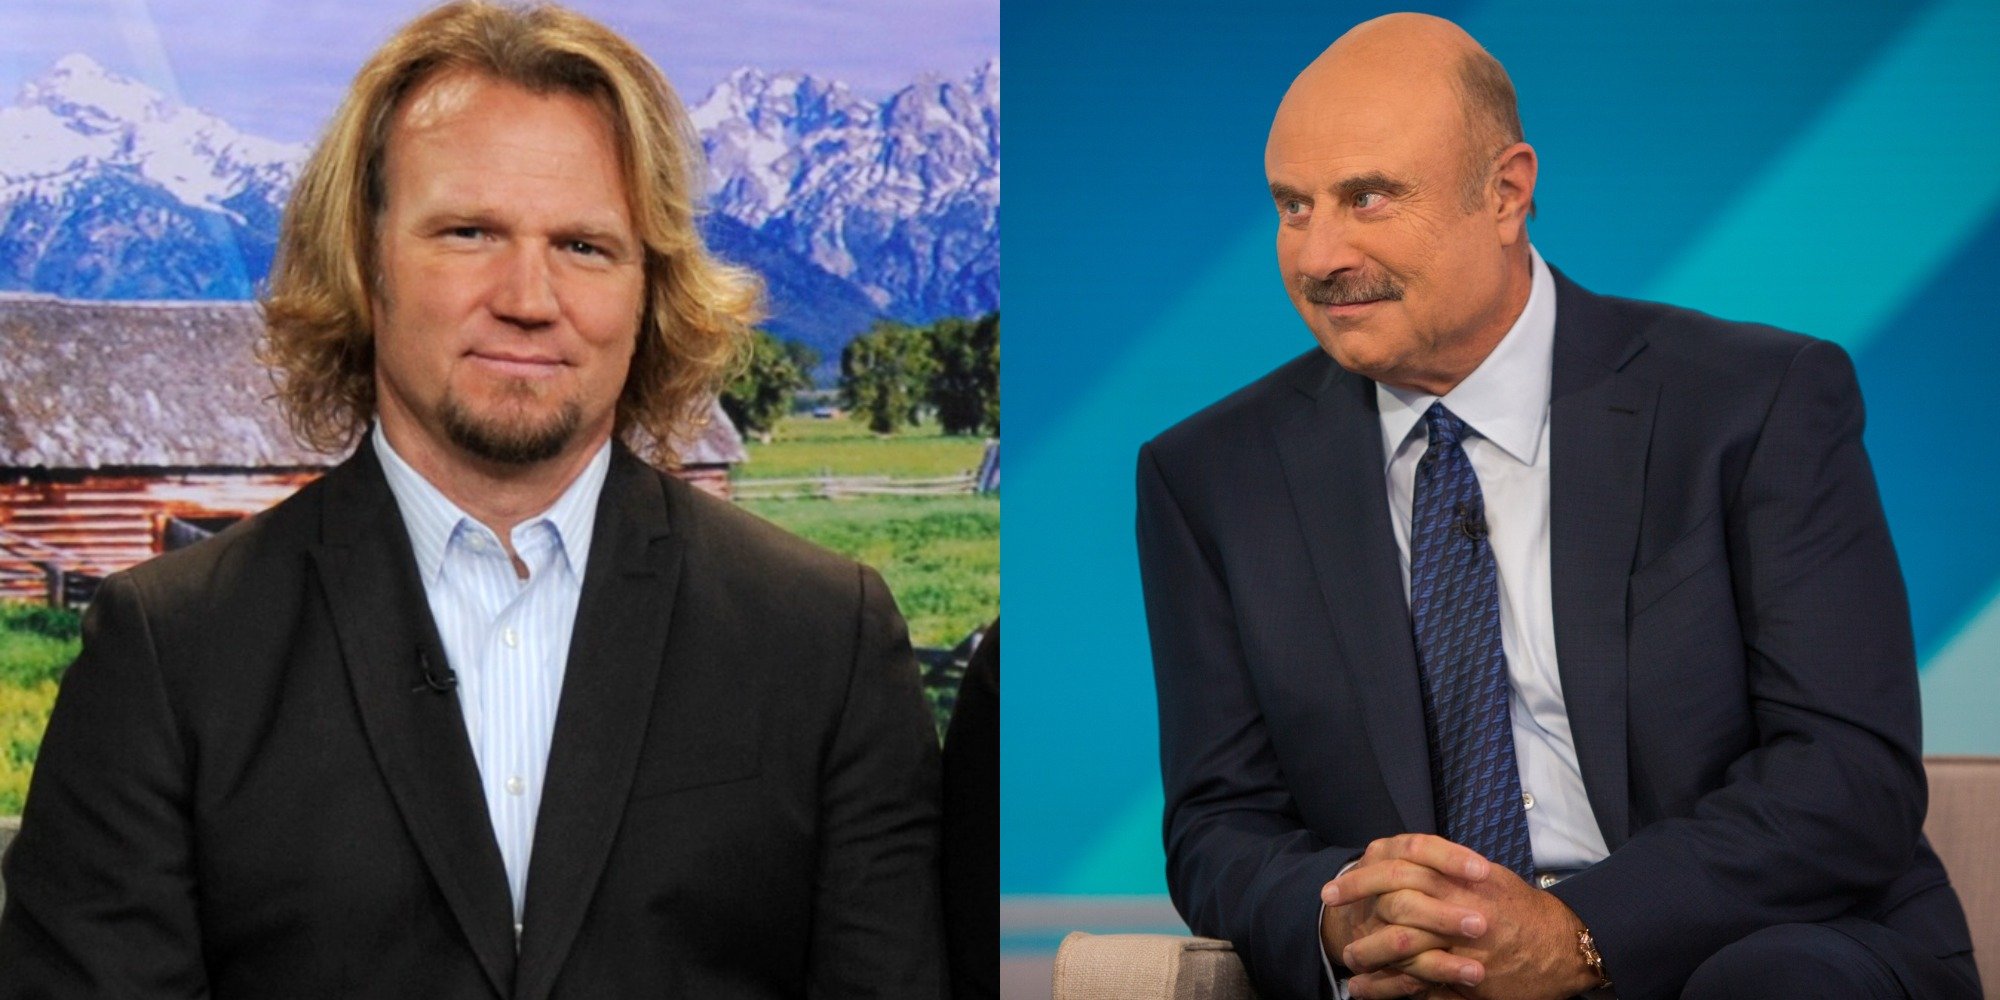 ‘Sister Wives’ Fans Beg for Dr. Phil to ‘Pick Kody Brown Apart’ as Talk Show Guest